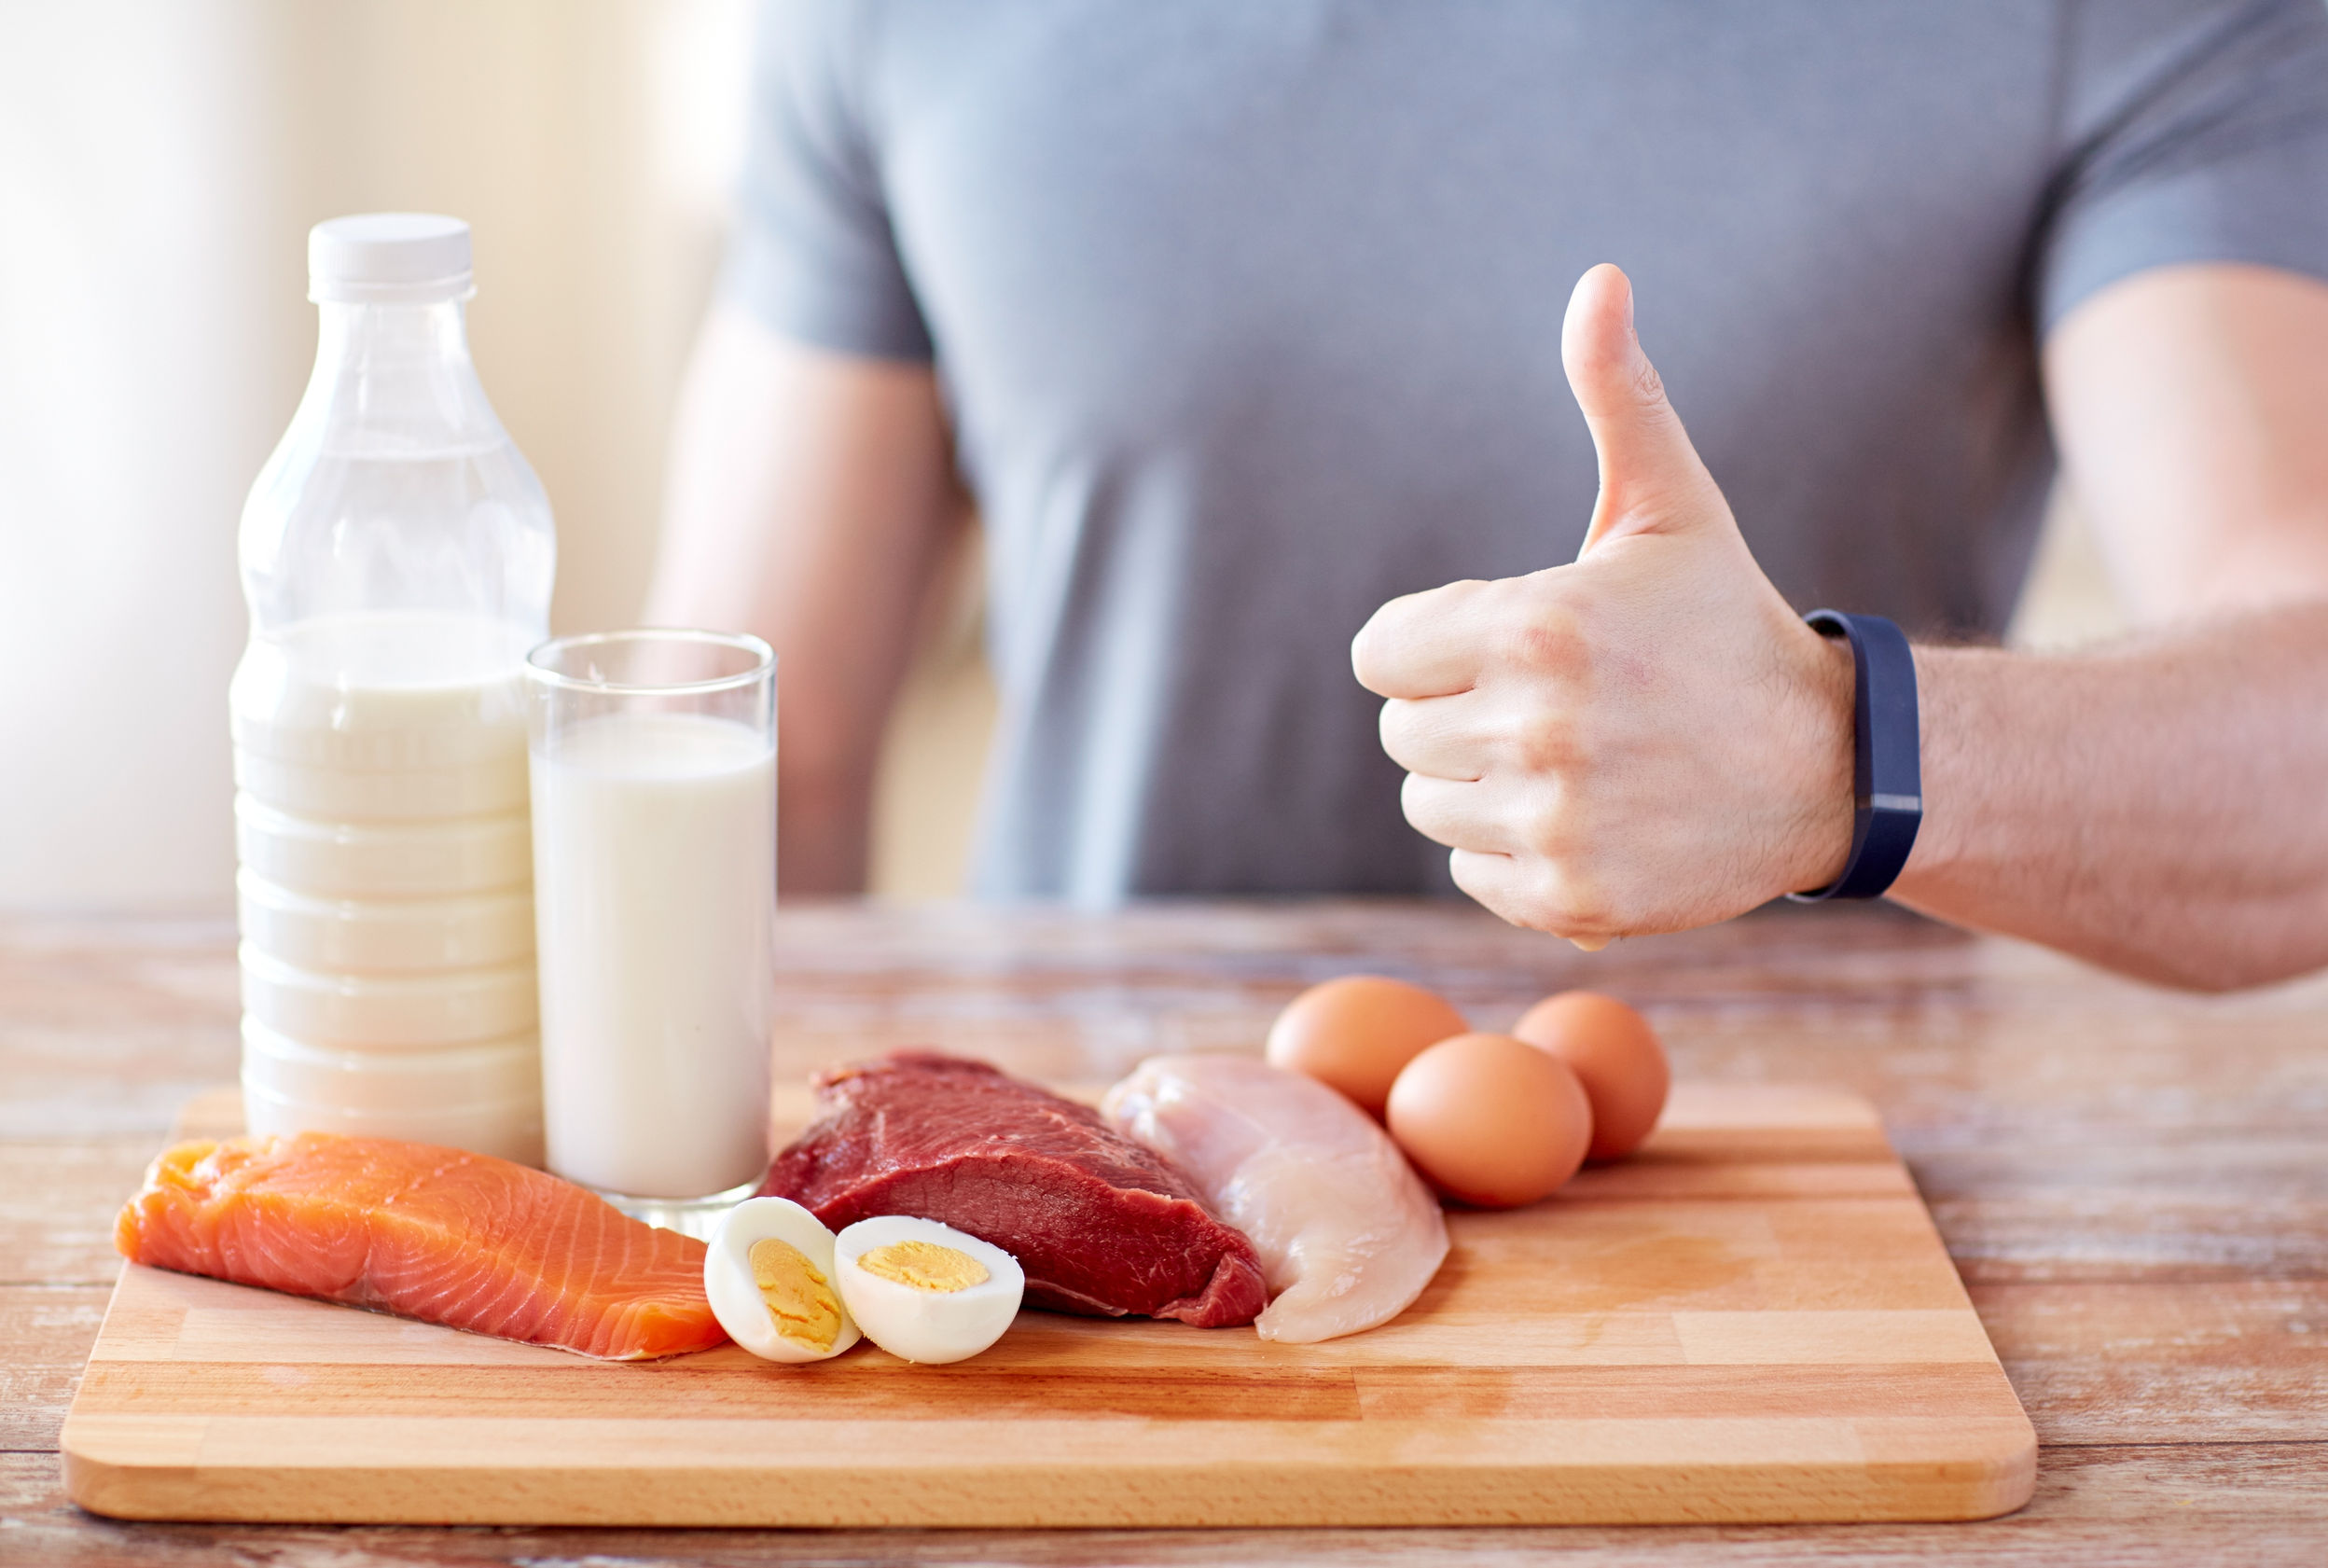 53578415 - sport, fitness, healthy lifestyle, diet and people concept - close up of man with food rich in protein showing thumbs up